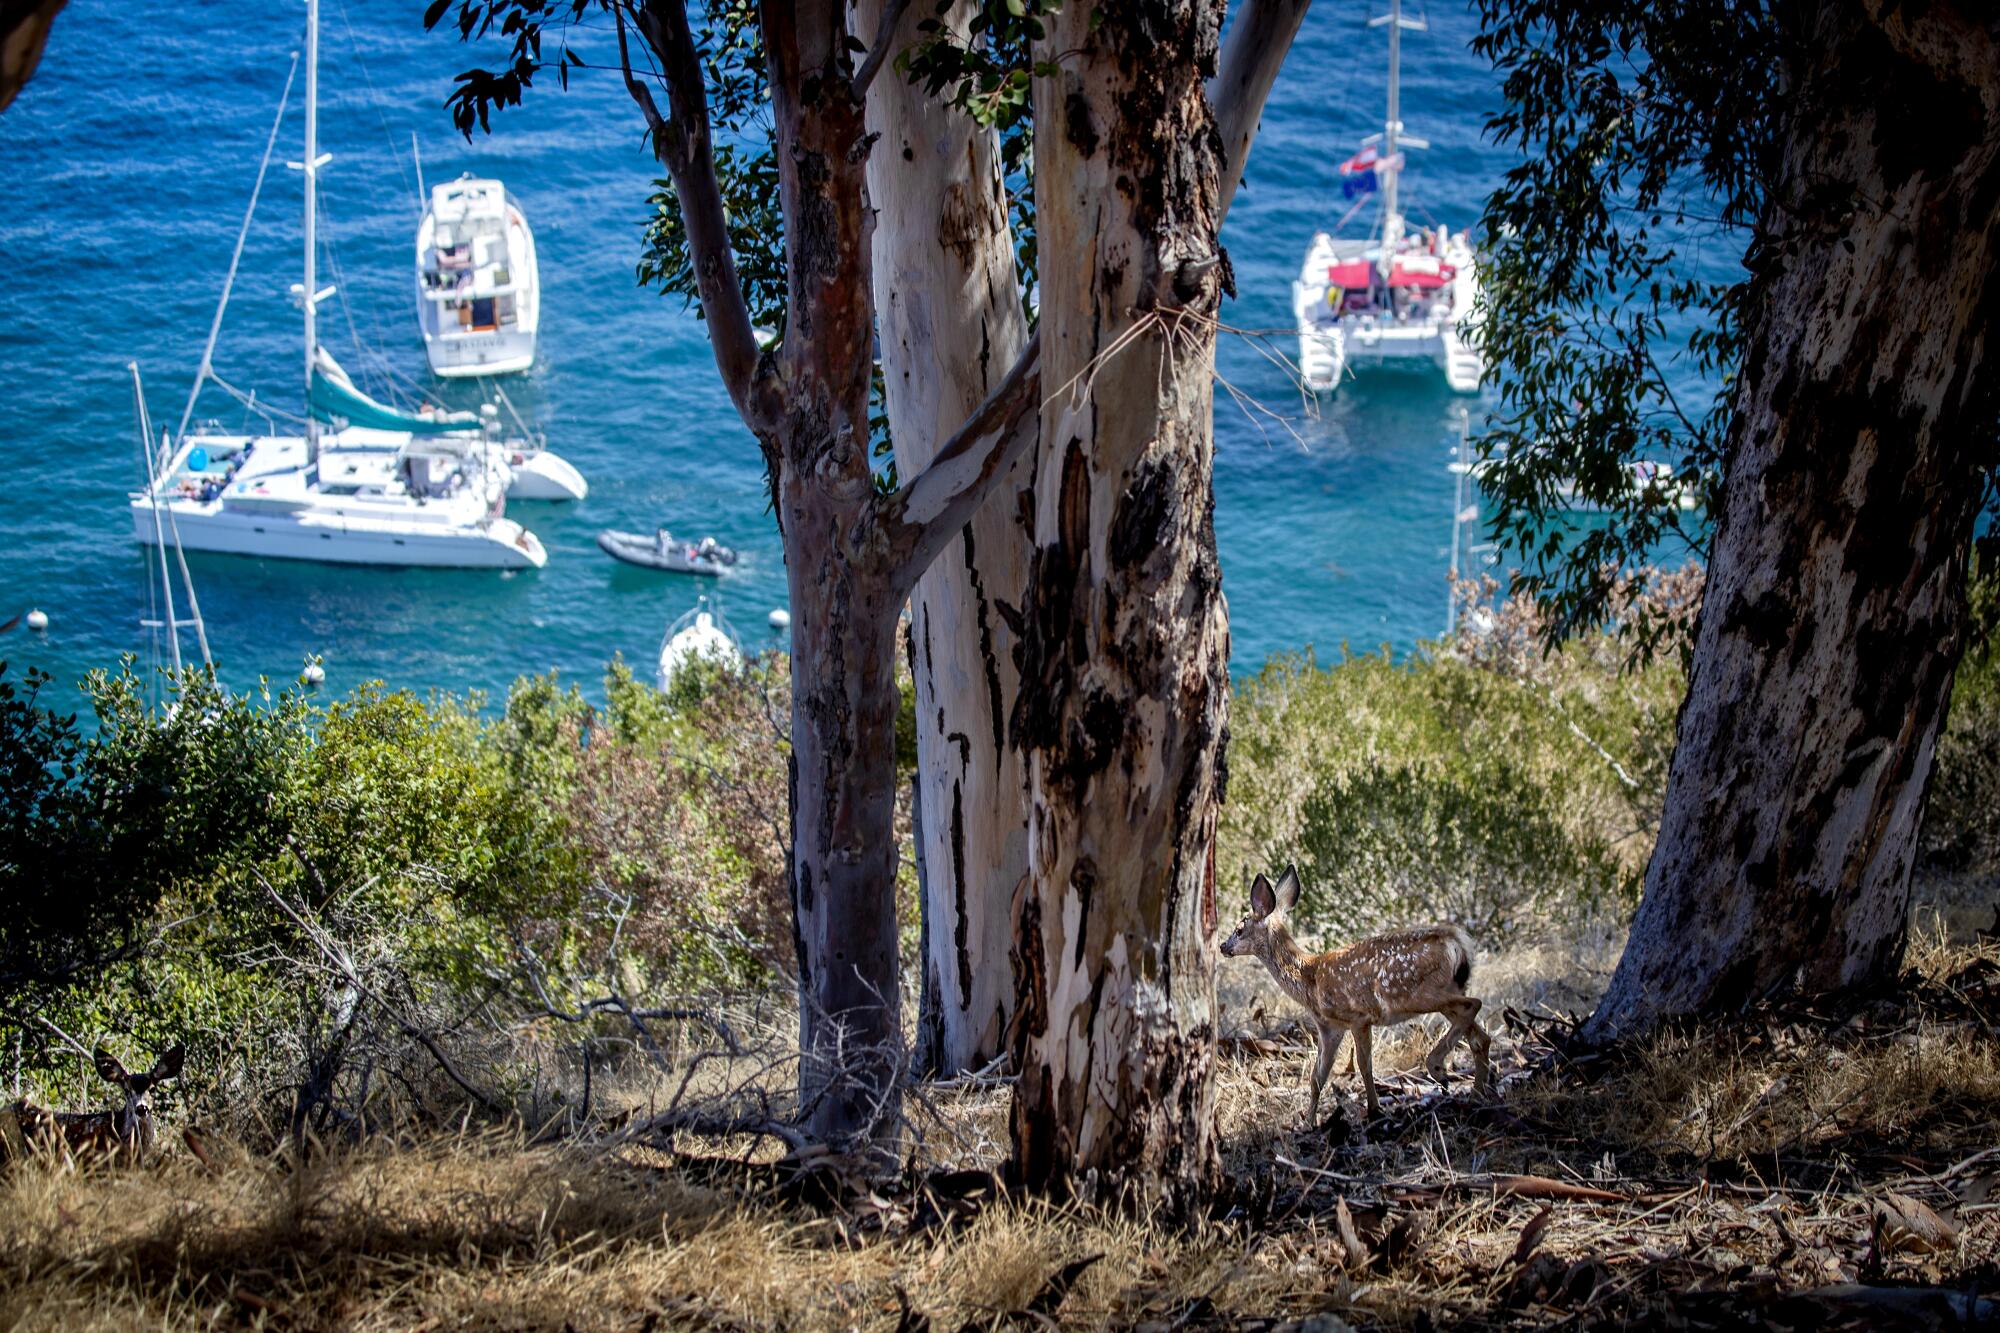 A fawn grazes in a forested area overlooking sailboats in a harbor.